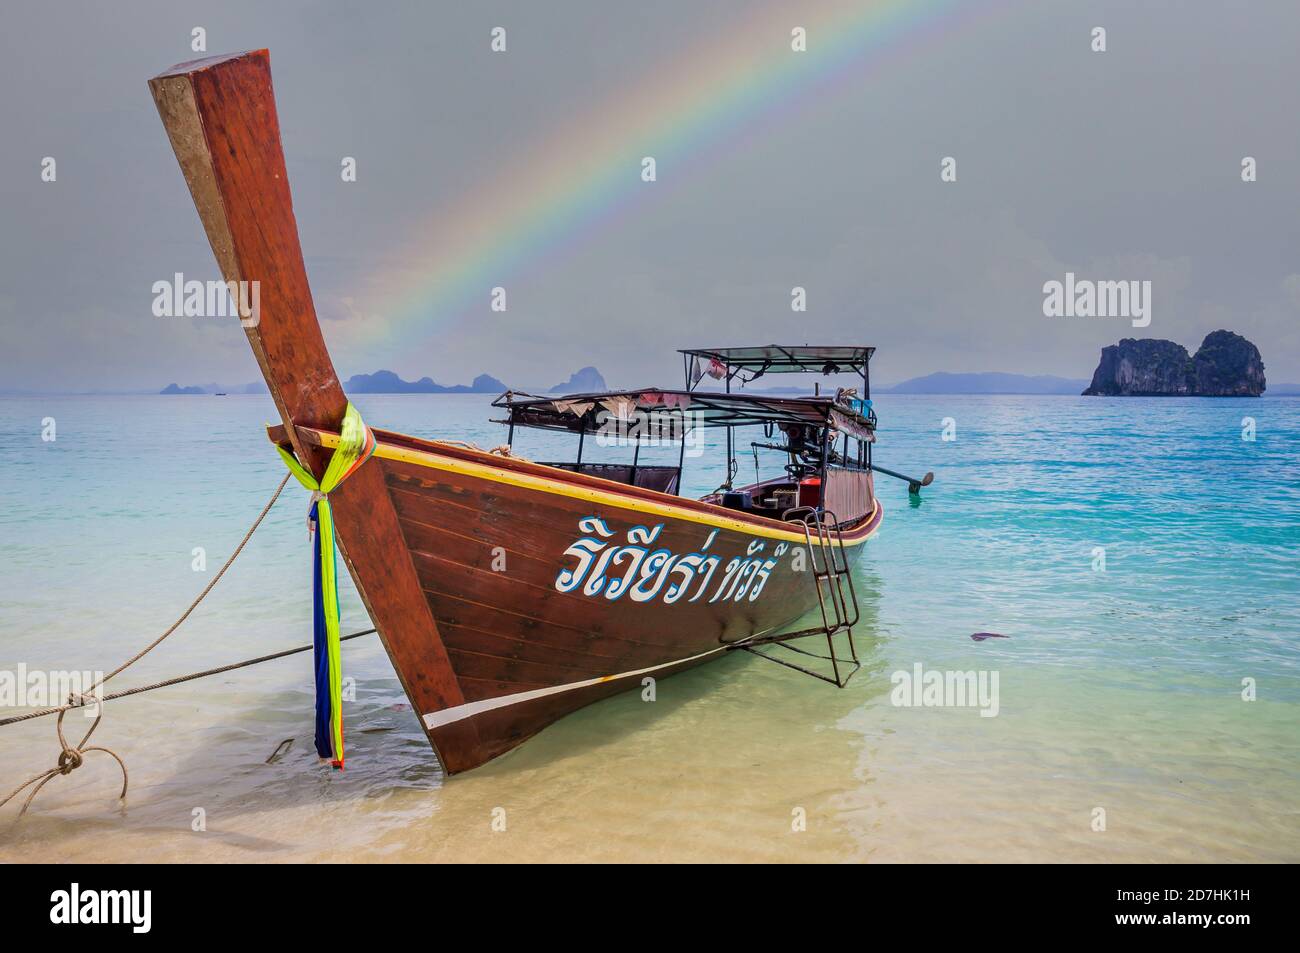 Longtail boat on beach in Thailand with rainbow Stock Photo